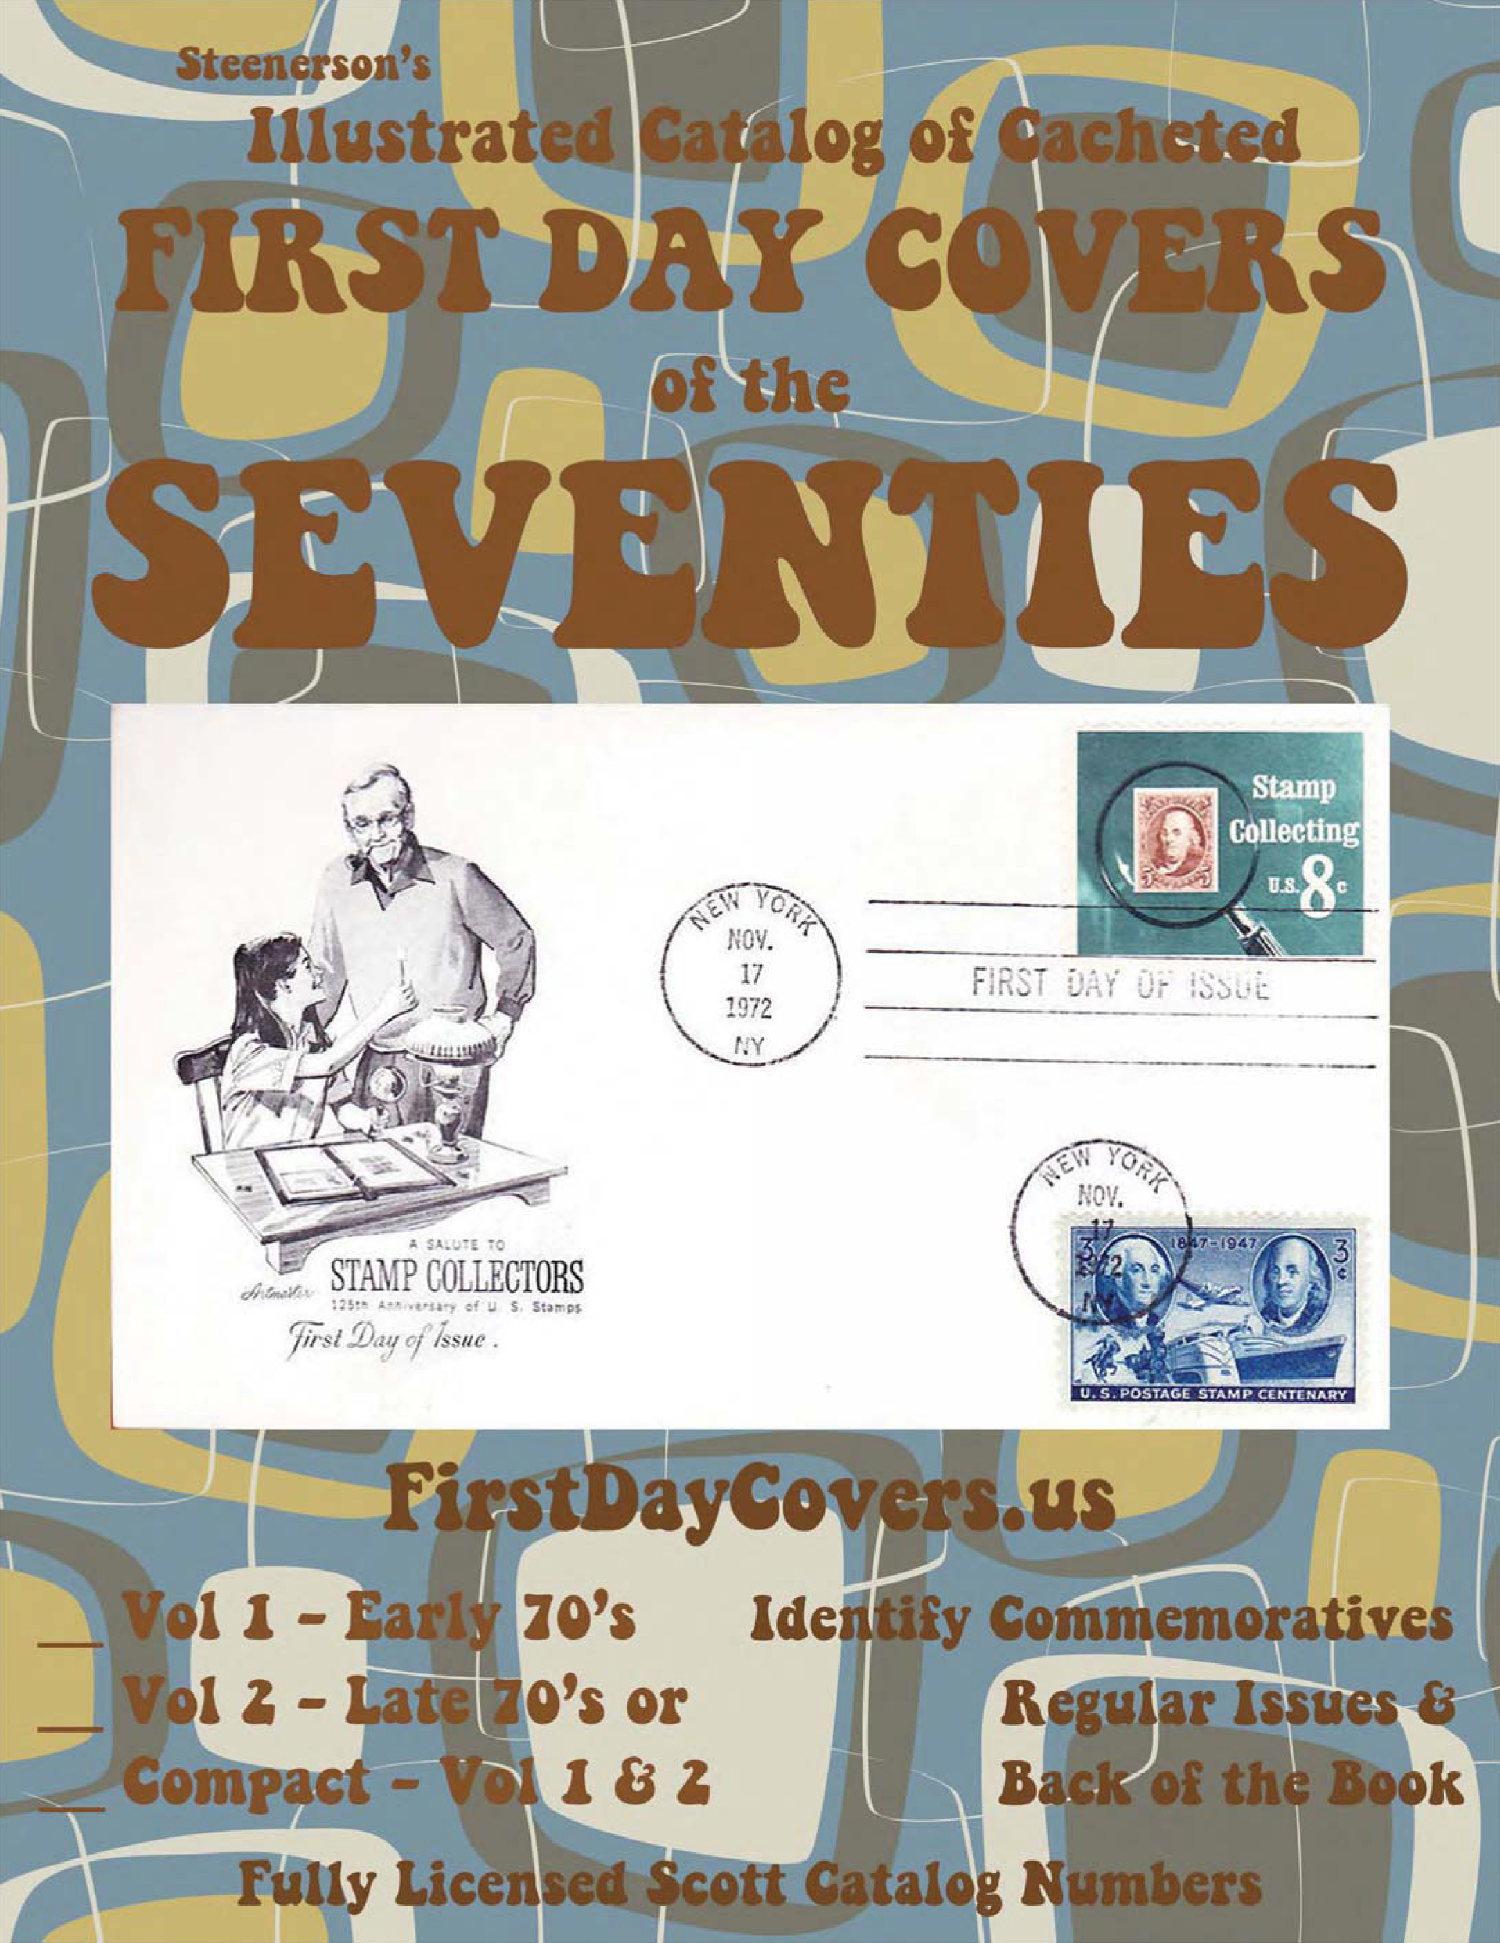 FirstDayCovers.us